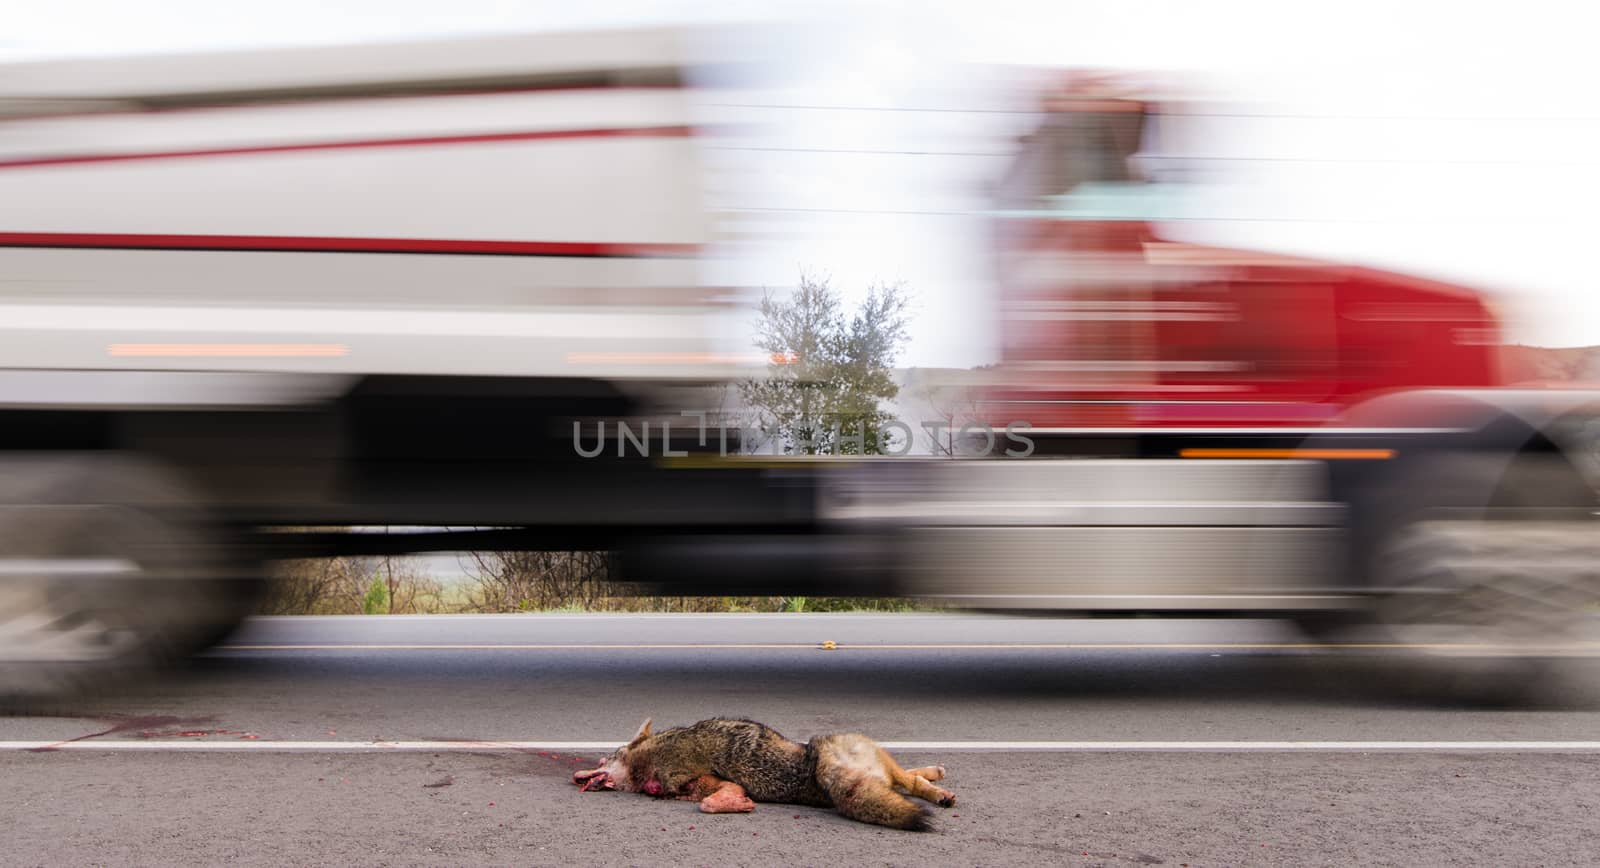 Roadkill - a coyote laying on the side of the road with a truck passing by